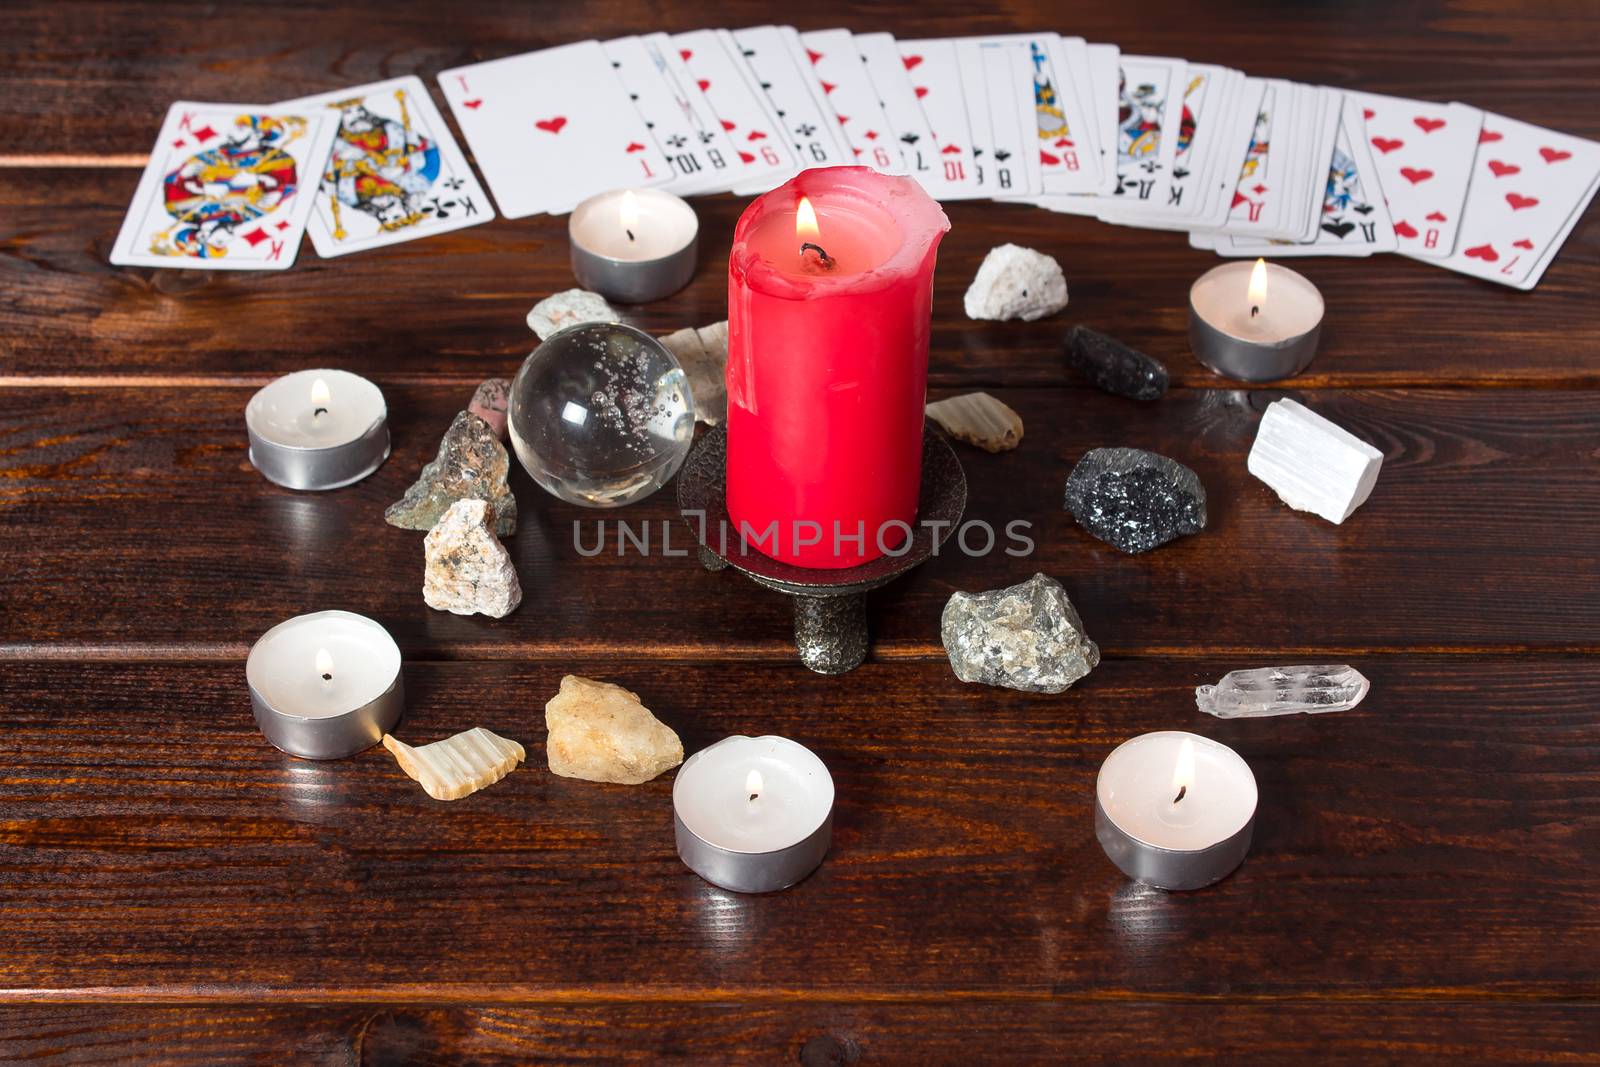 Bangkok, Thailand, March.15.20.On the table are fortune-telling cards, a magic ball, magic crystals and a lighted candle.Magic sessions with clairvoyance cards. Card reading by candlelight